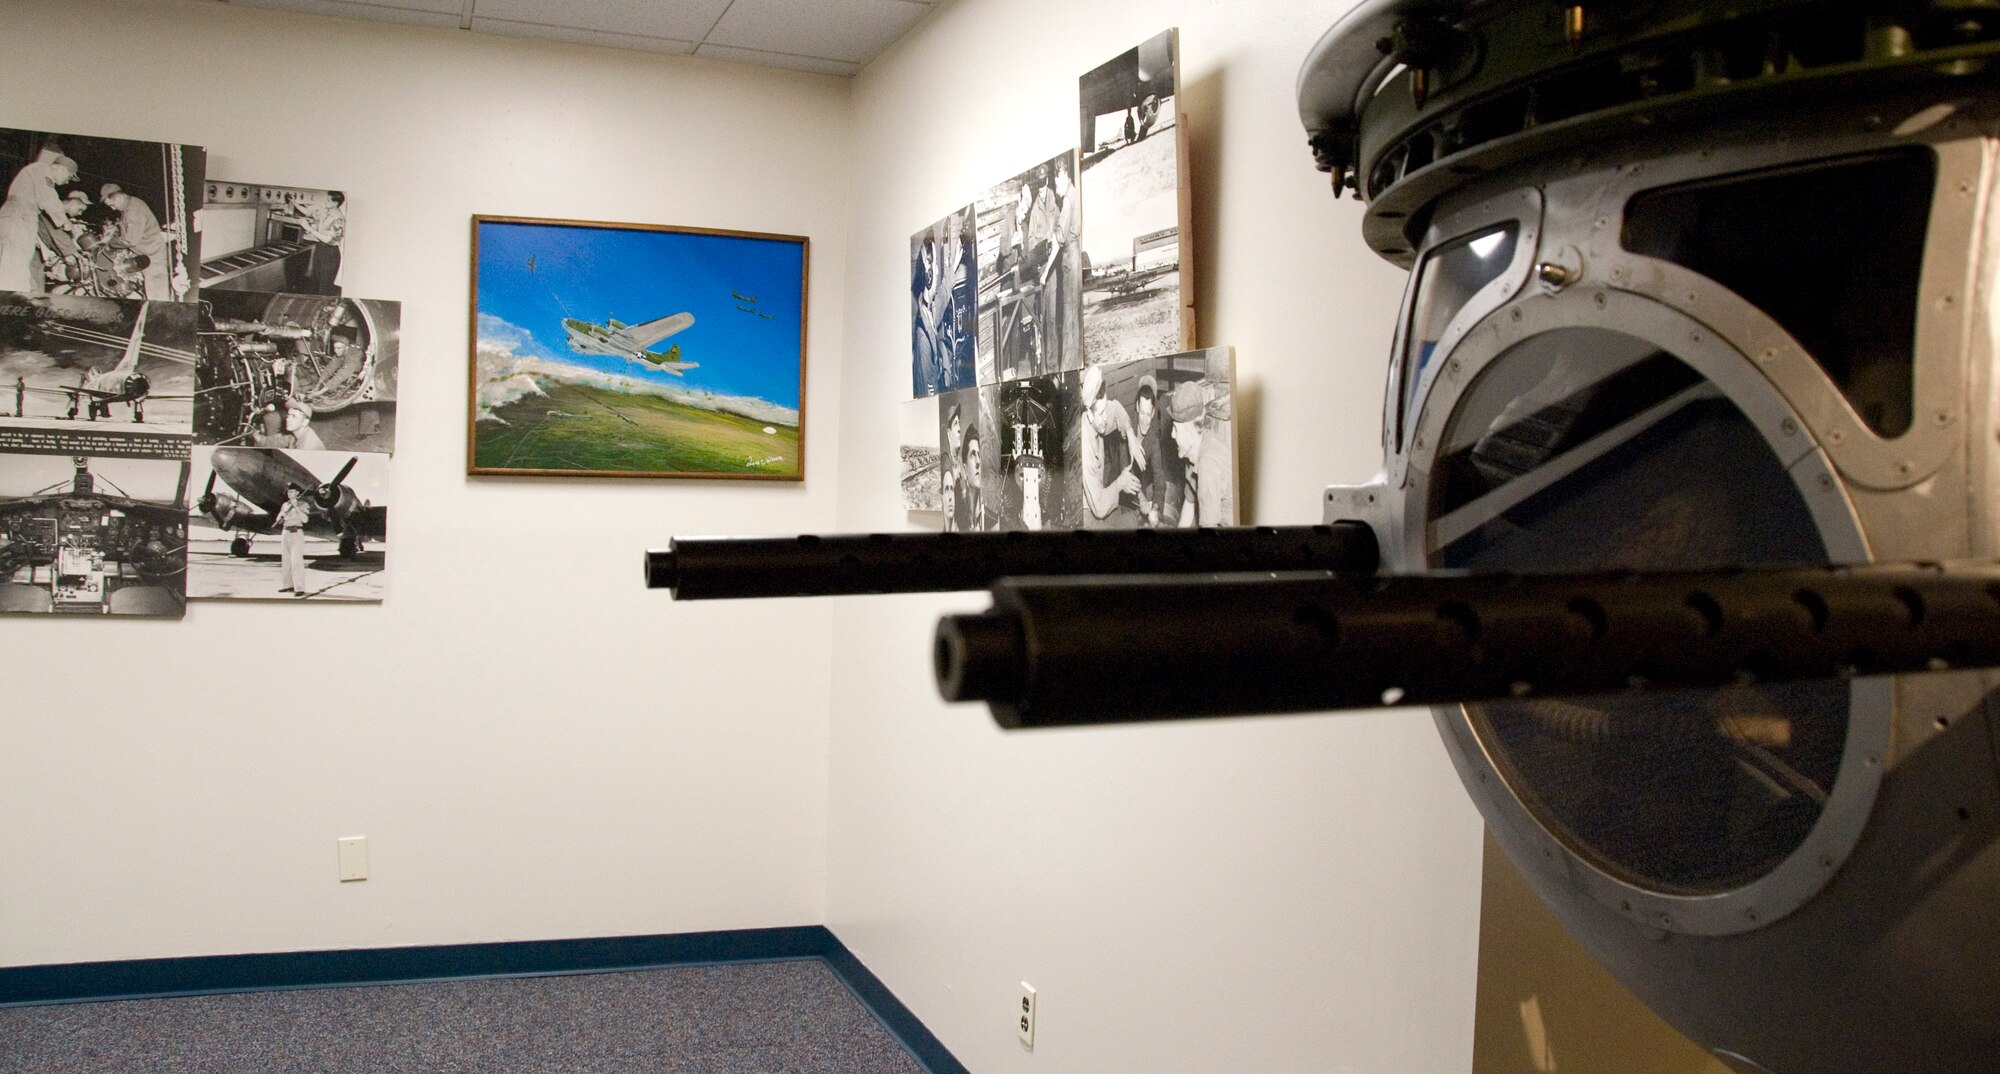 The “Gunner’s Alley” exhibit, complete with the ball turret from a B-17 Flying Fortress, occupies a section in the original museum. When completed, the displays will honor enlisted members who served as aircraft gunners during World War II, the Korean War, the Vietnam War, Desert Storm and the current conflicts. (Air Force photo by Jamie Pitcher)